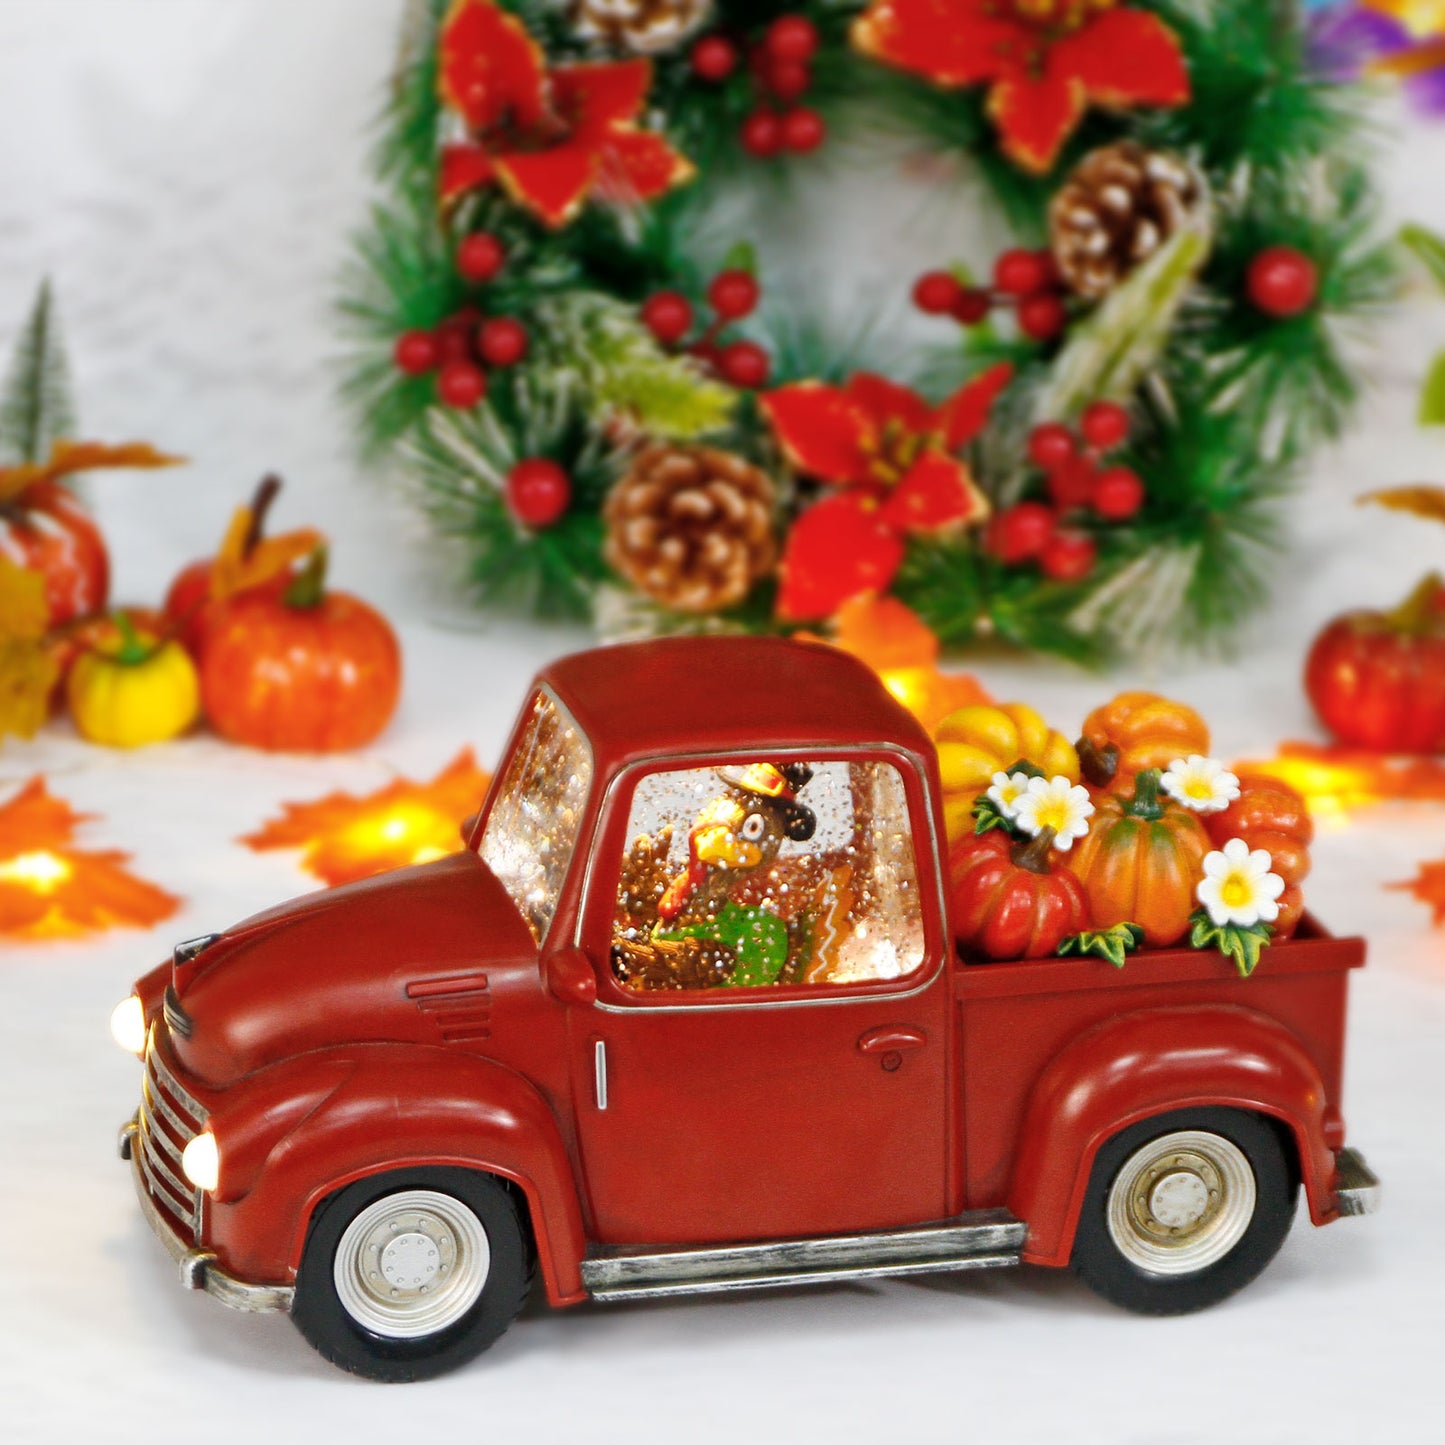 Fall Lighted Water Lantern, Turkey in Vintage Red Truck with Pumpkins for Fall Harvest Day Decor, Thanksgiving Snow Globe with Swirling Glitter